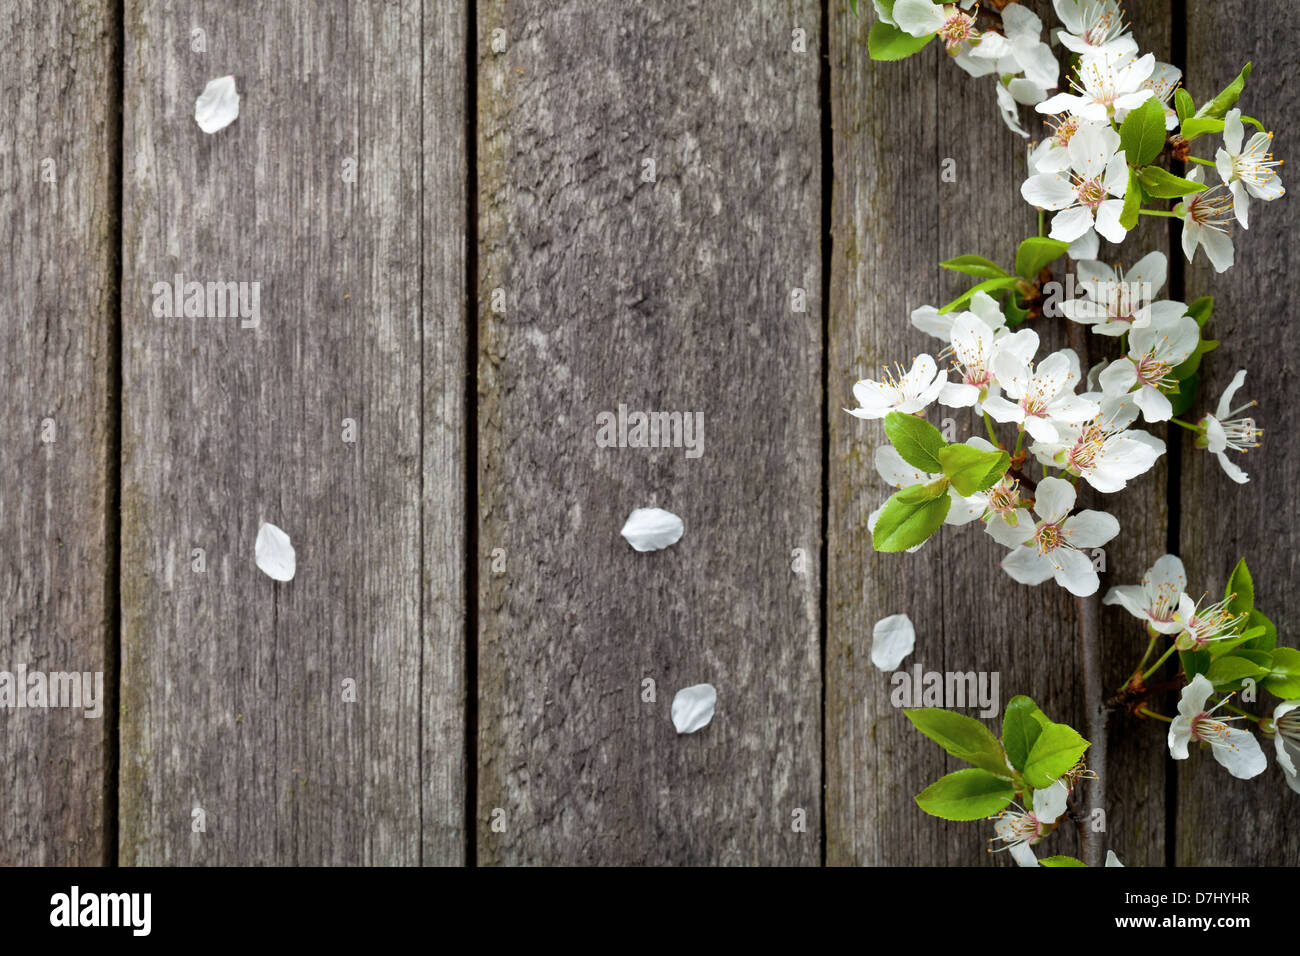 Spring flowers on wooden table background. Plum blossom. Top view Stock Photo